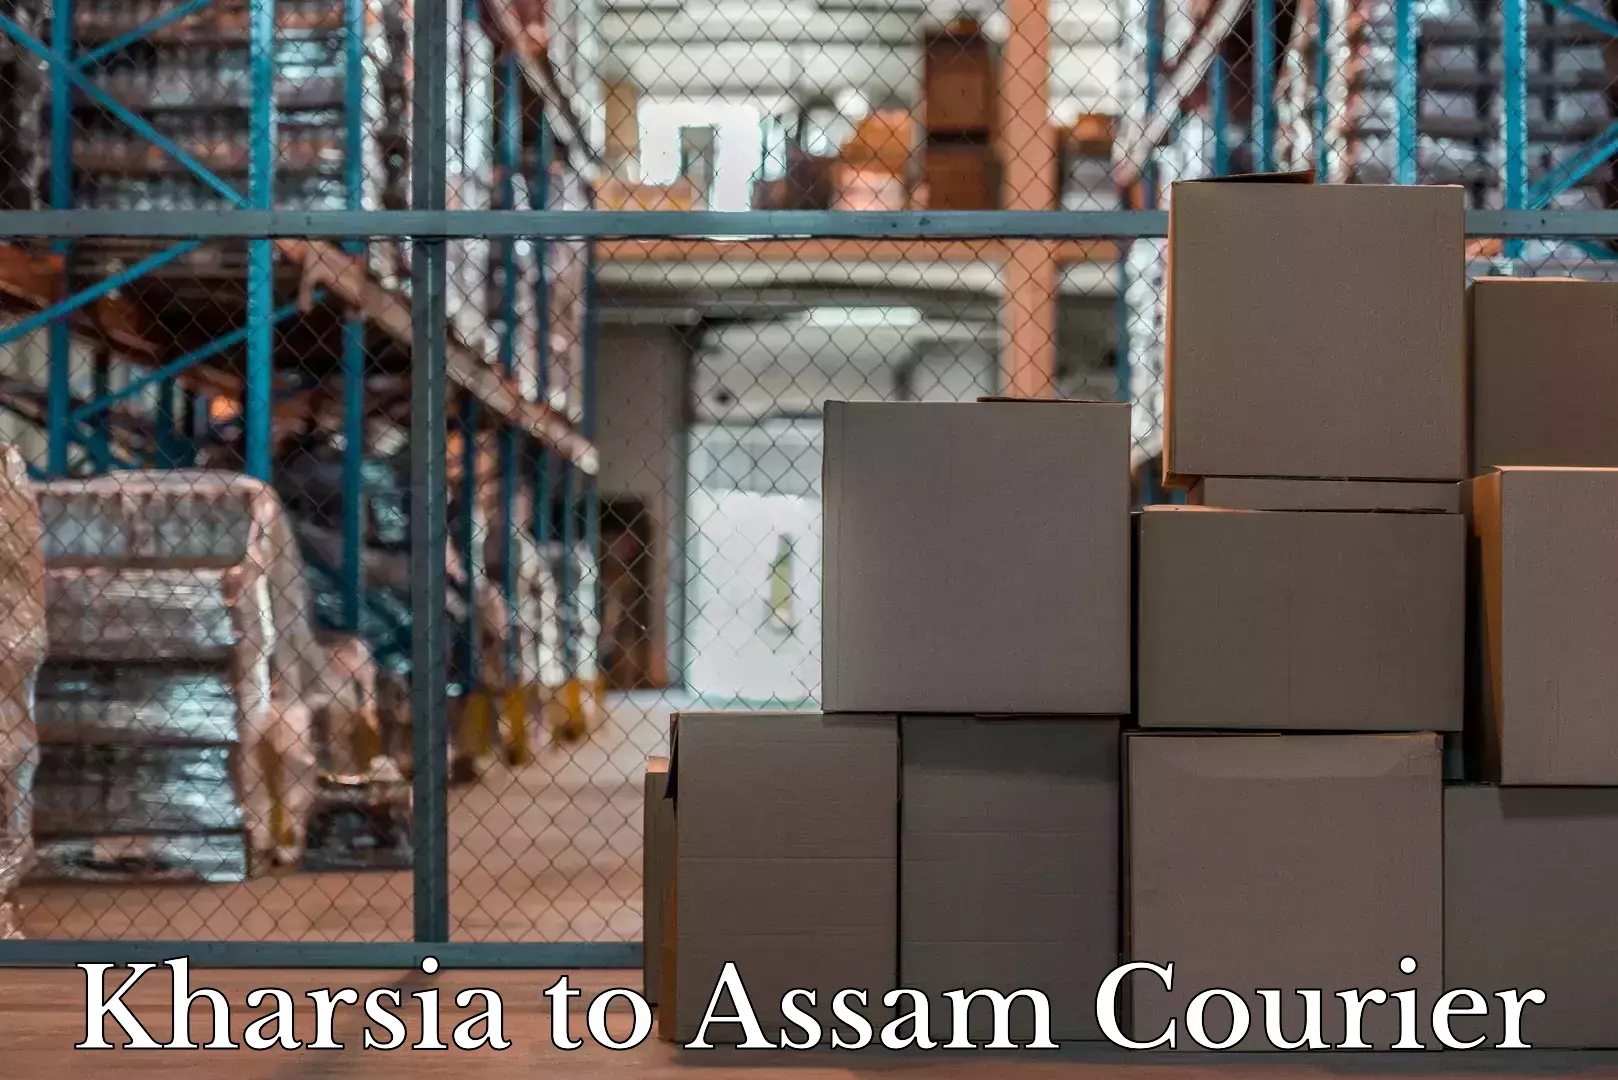 Baggage shipping experience Kharsia to Lala Assam